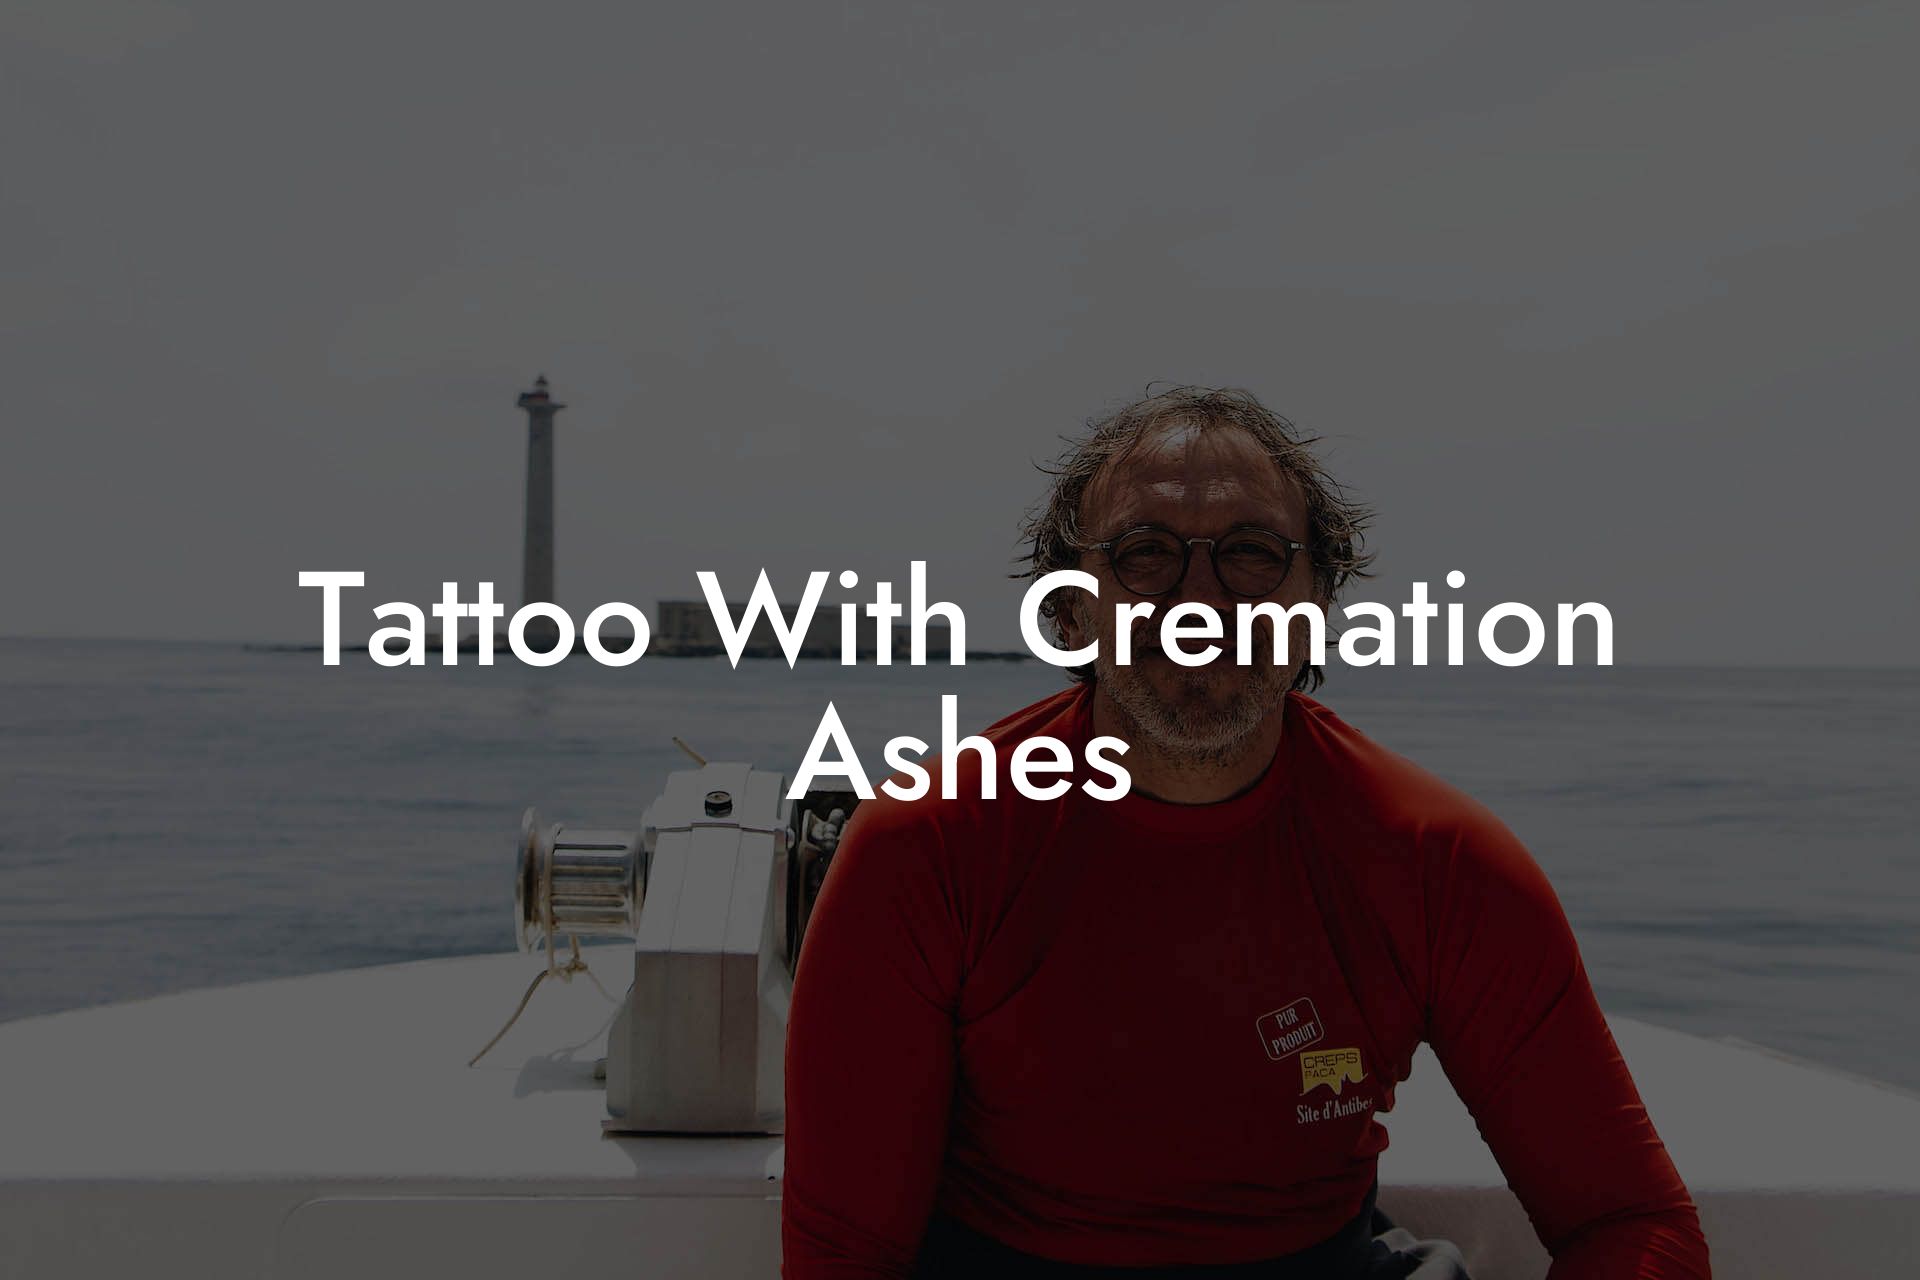 Tattoo With Cremation Ashes